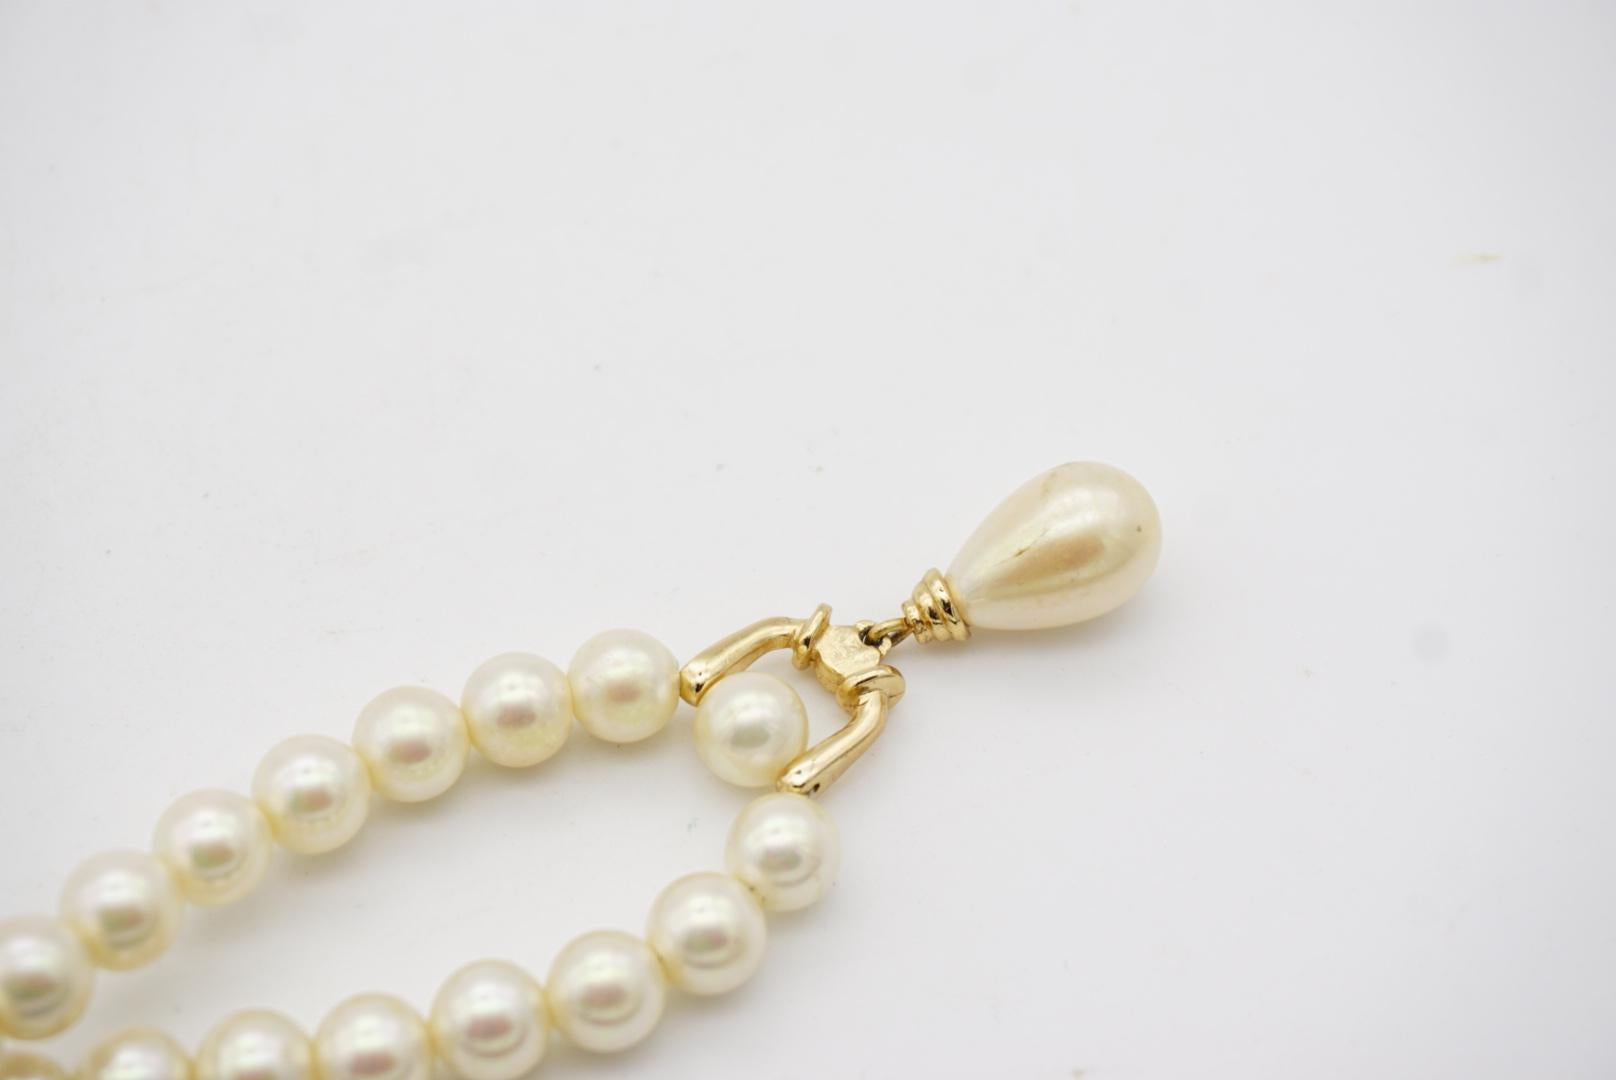 Christian Dior GROSSE 1960s White Pearls Water Drop Pendant Crystals Necklace For Sale 7